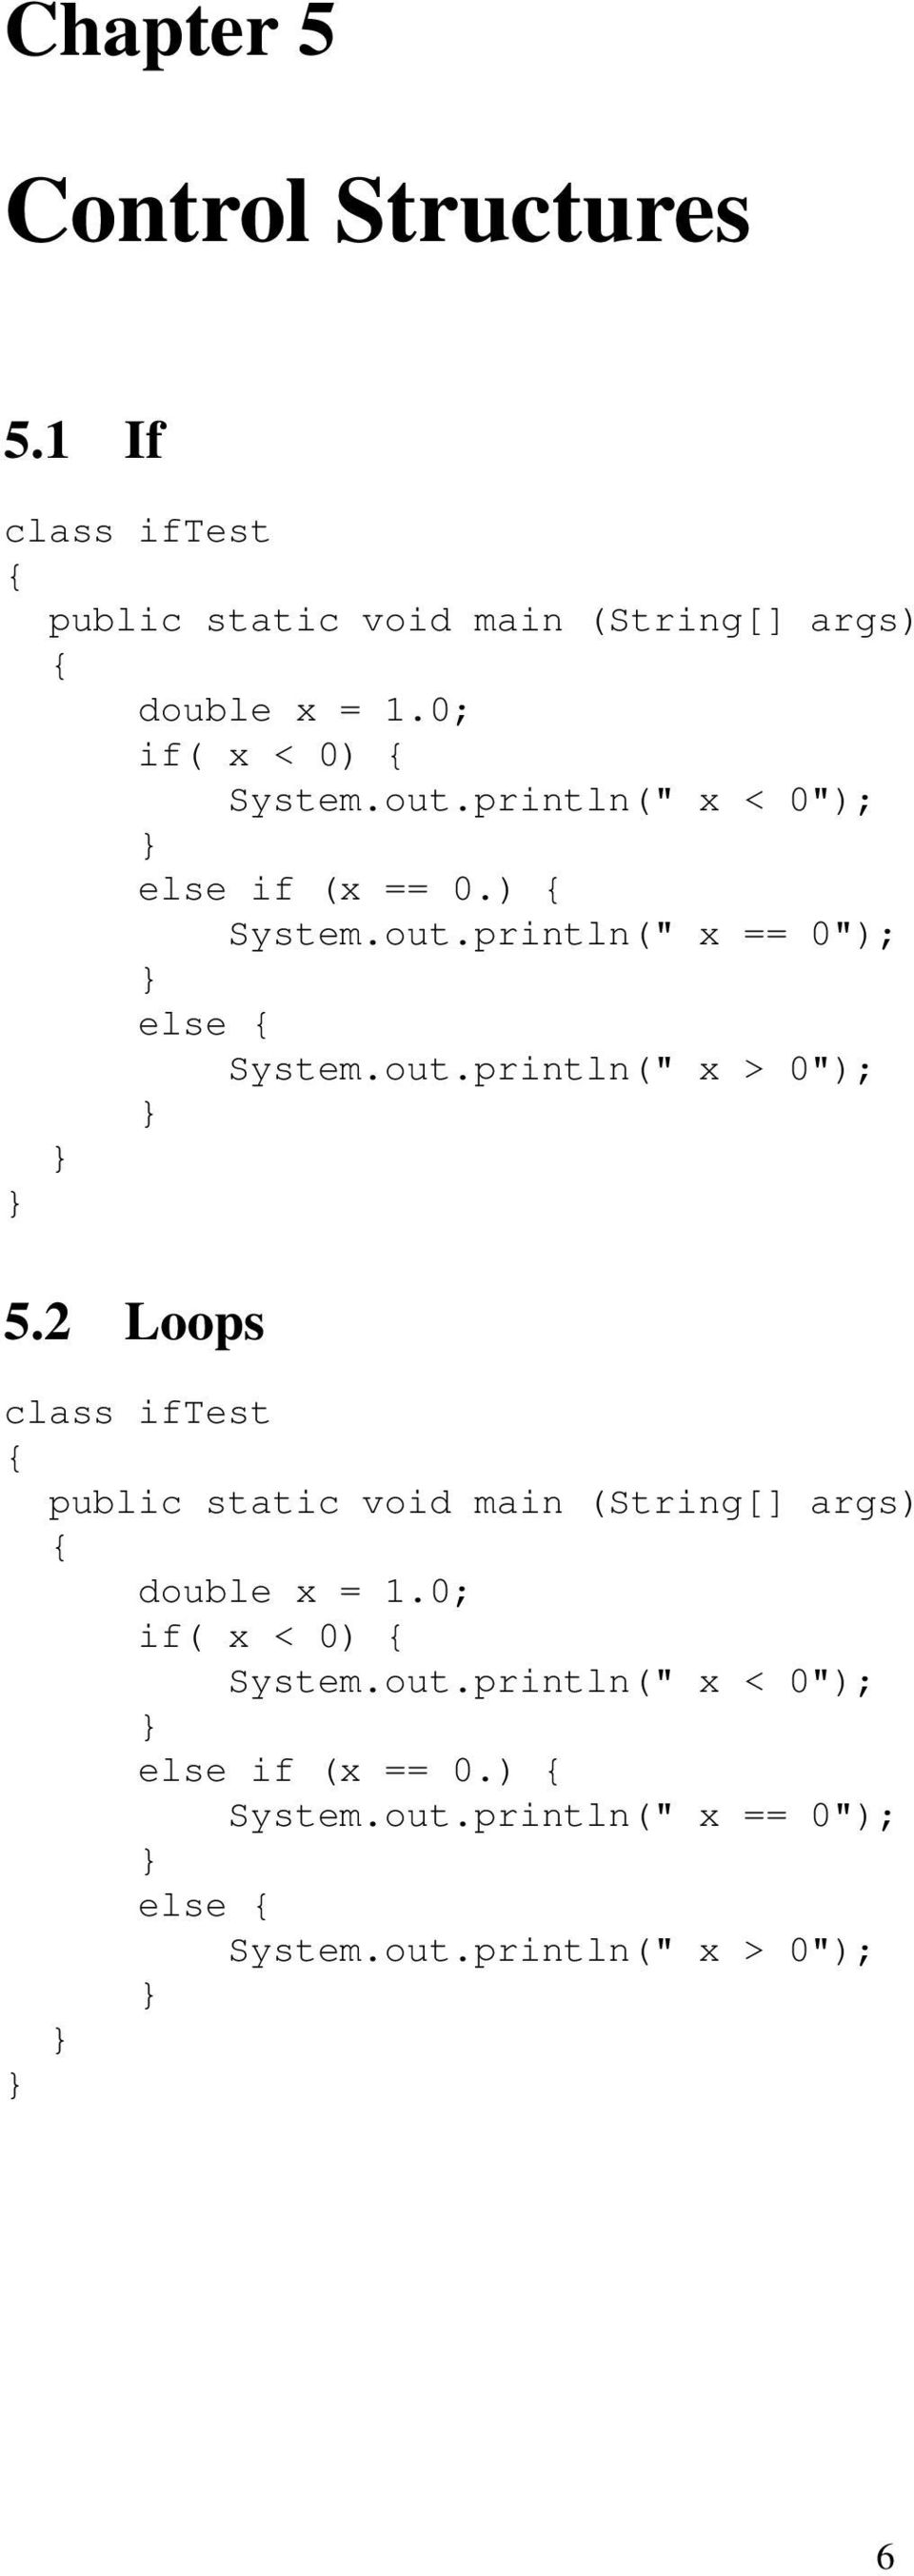 2 Loops class iftest double x = 1.0; if( x < 0) System.out.